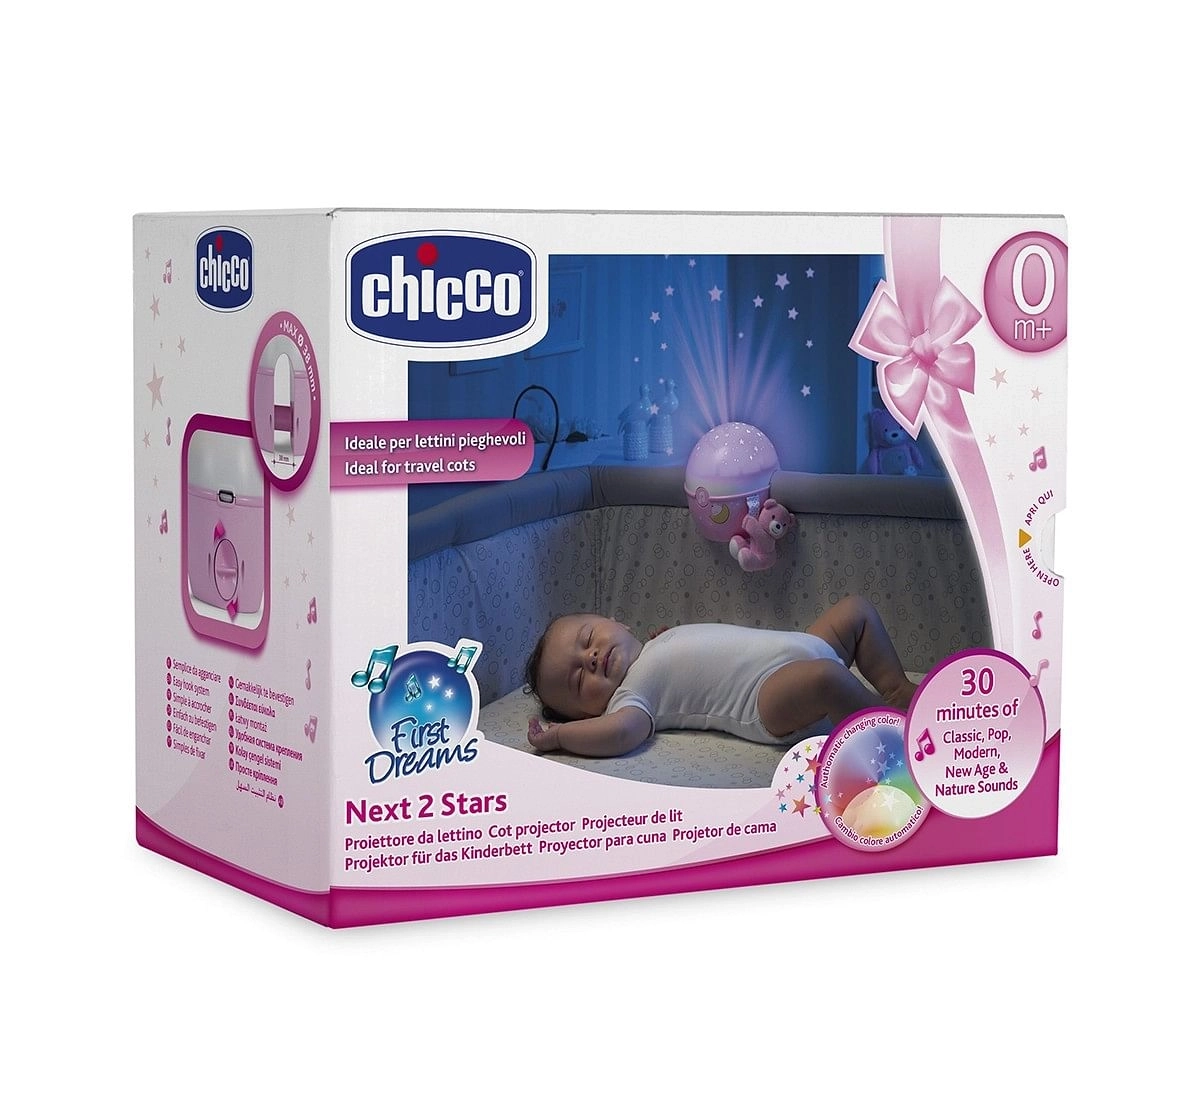 Chicco First Dreams Next 2 Stars Cot Projector with Music for New Born age 0M+ (Pink)